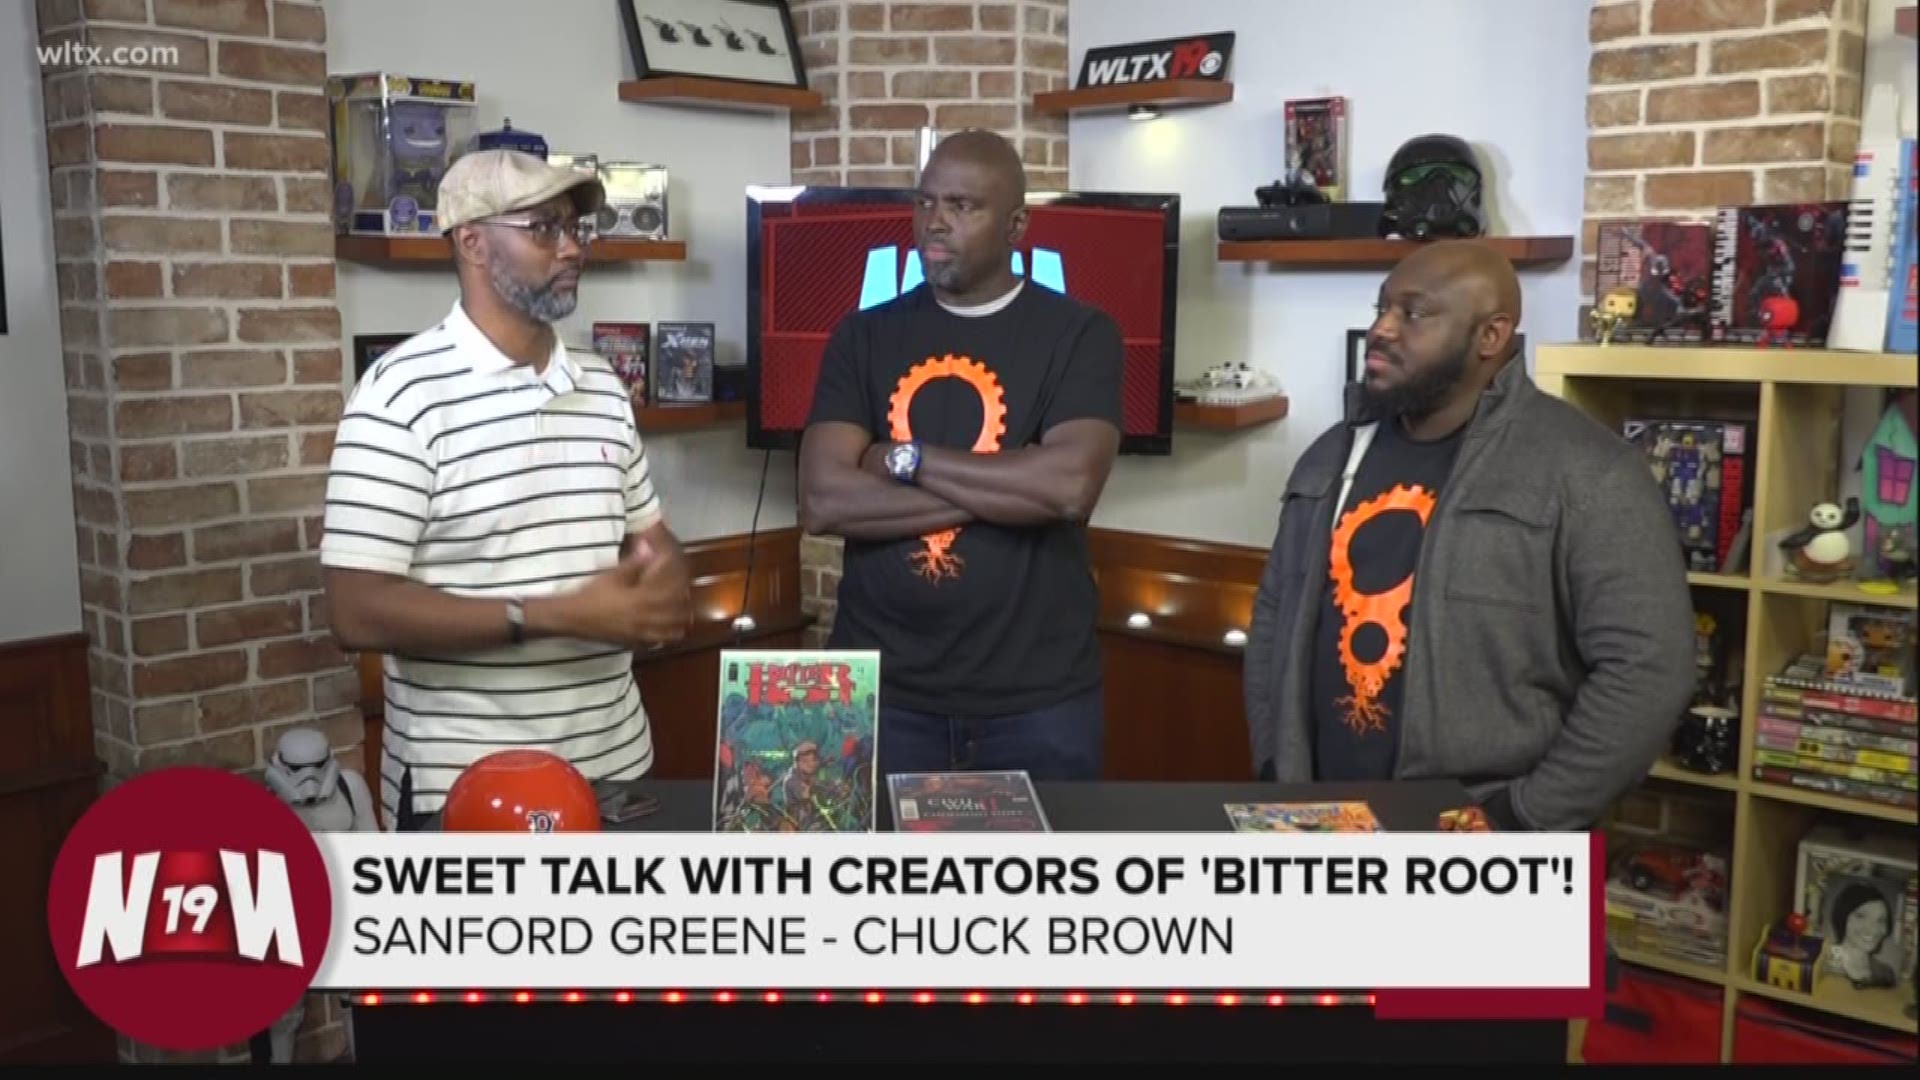 Leroy Green from the News19 Nerds speak with Sanford Greene and Chuck Brown, the creators of 'Bitter Root.'